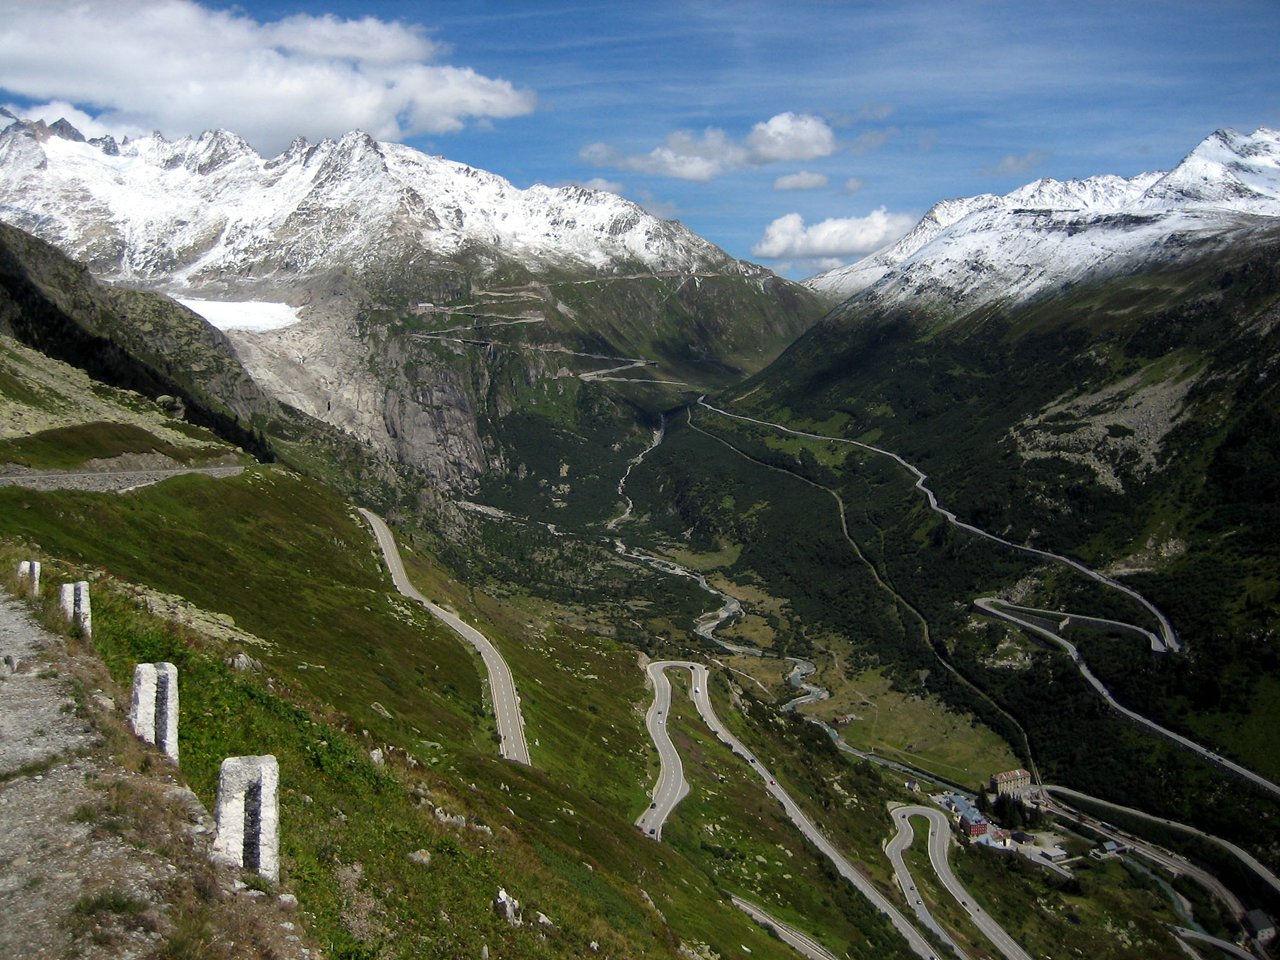 The road up the Grimsel Pass, and to the other side, the road up the Furkapass. Gletsch Valley. A drive through the Nufenenpass (Passo della Novena) and Grimsel Pass in Switzerland.